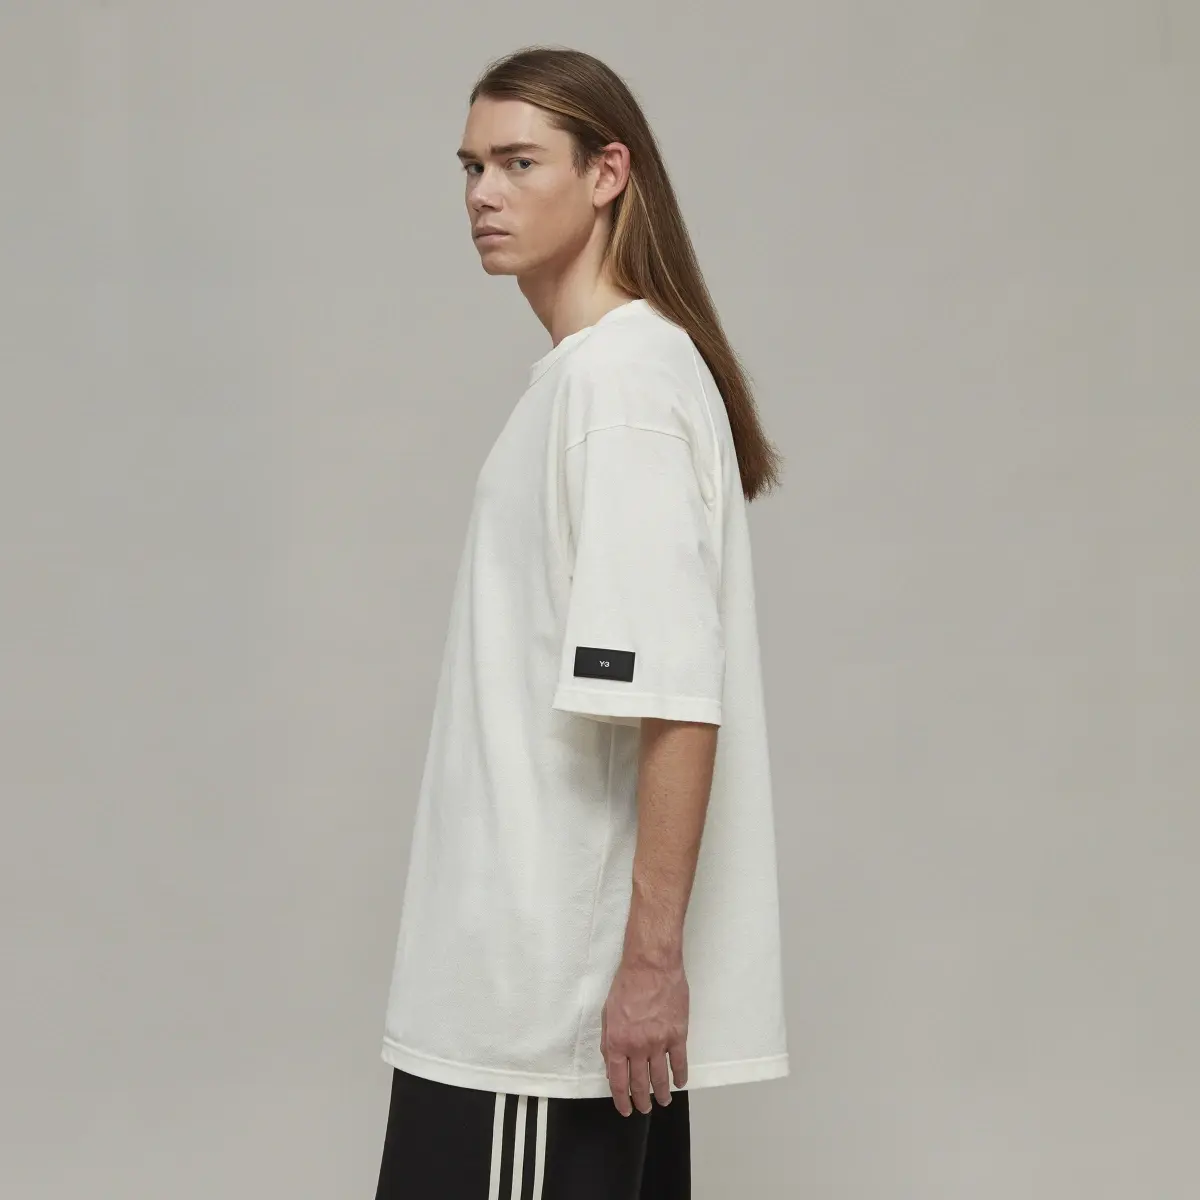 Adidas Y-3 Crepe Jersey T-Shirt. 2